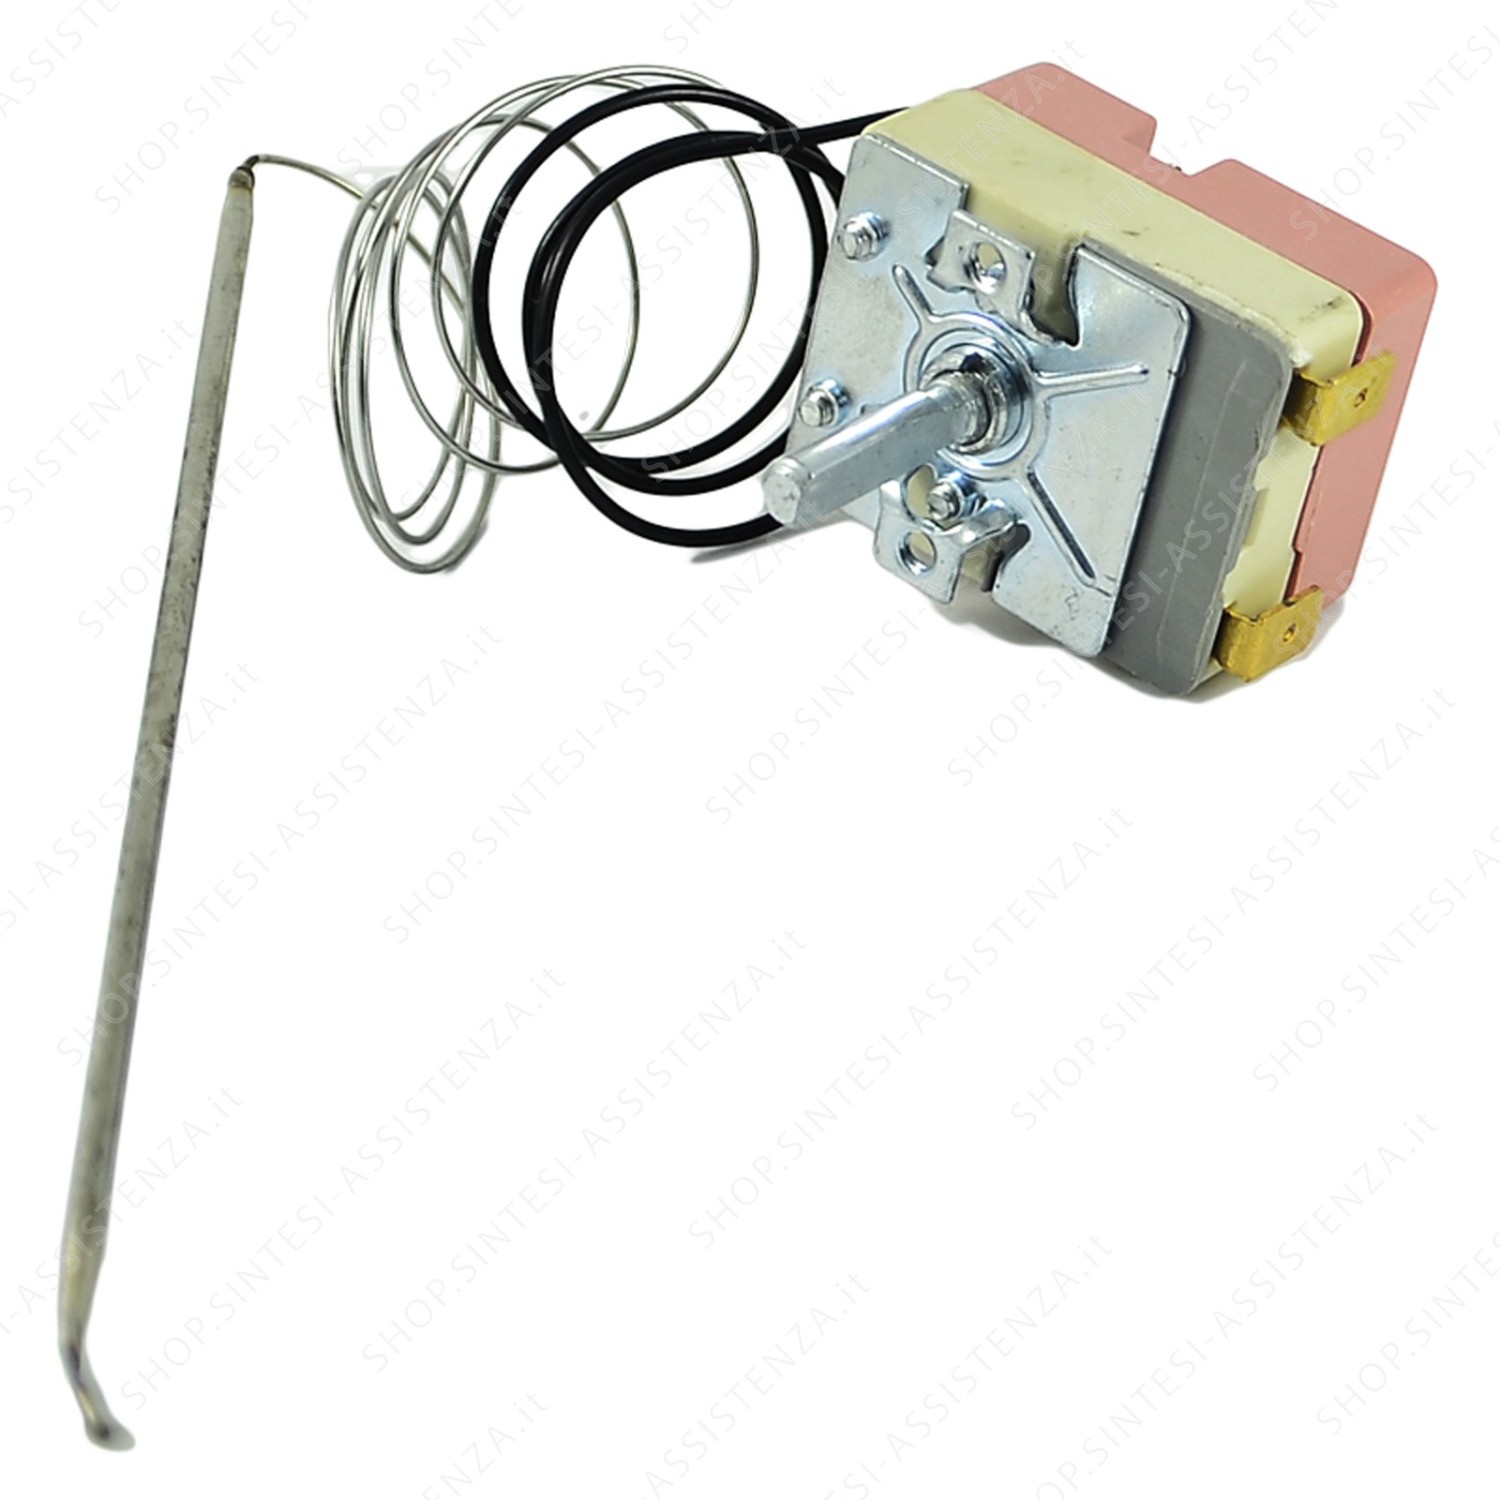 THERMOSTAT 0 285 DEGREES °C FRANKE OVEN TEMPERATURE 2 CONTACTS SMS 62 MXS 133.0315.582 - 133.0315.582 FR